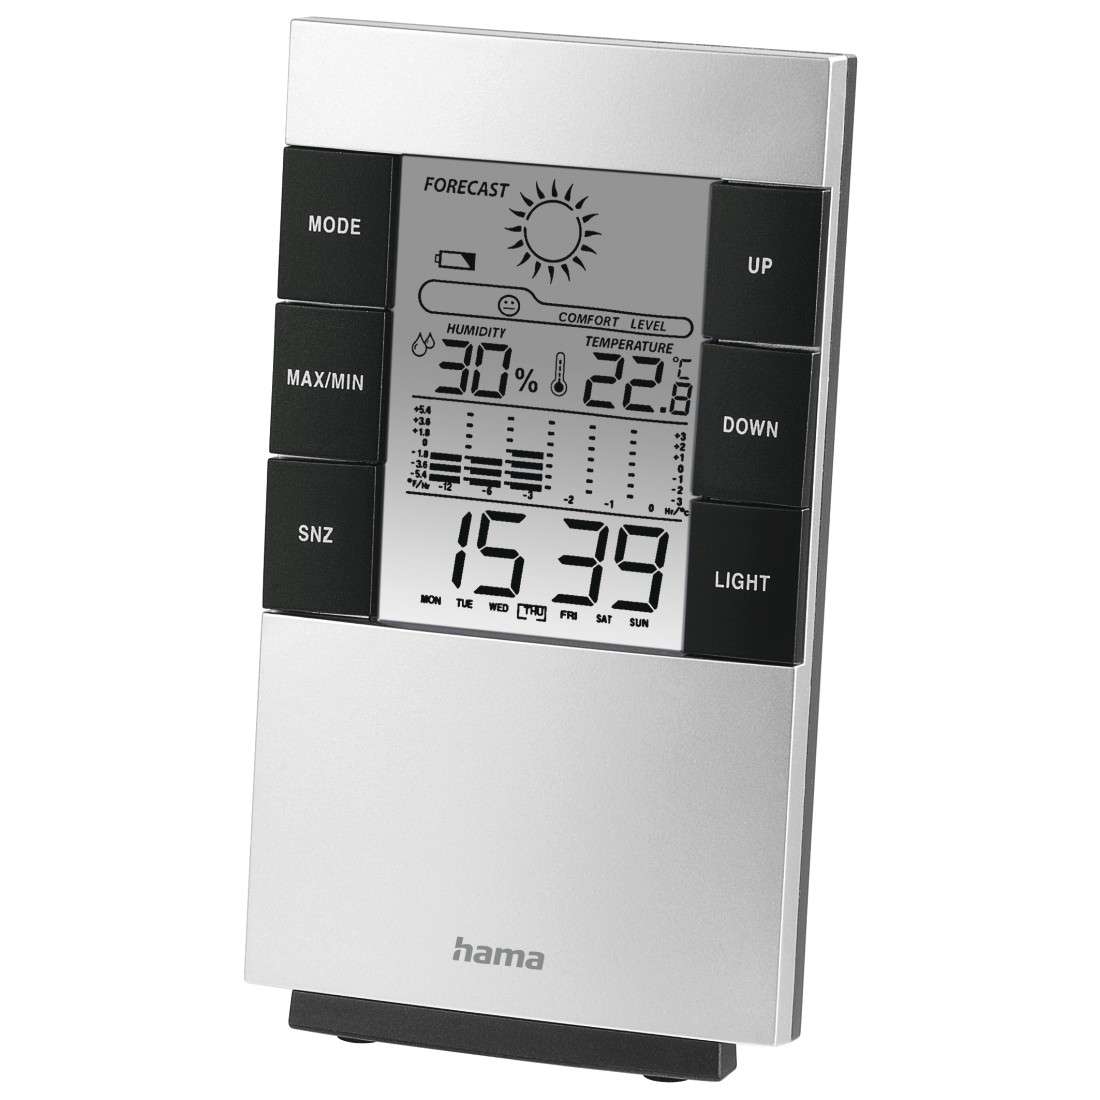 HAMA LCD-Thermo-/Hygrometer TH-200